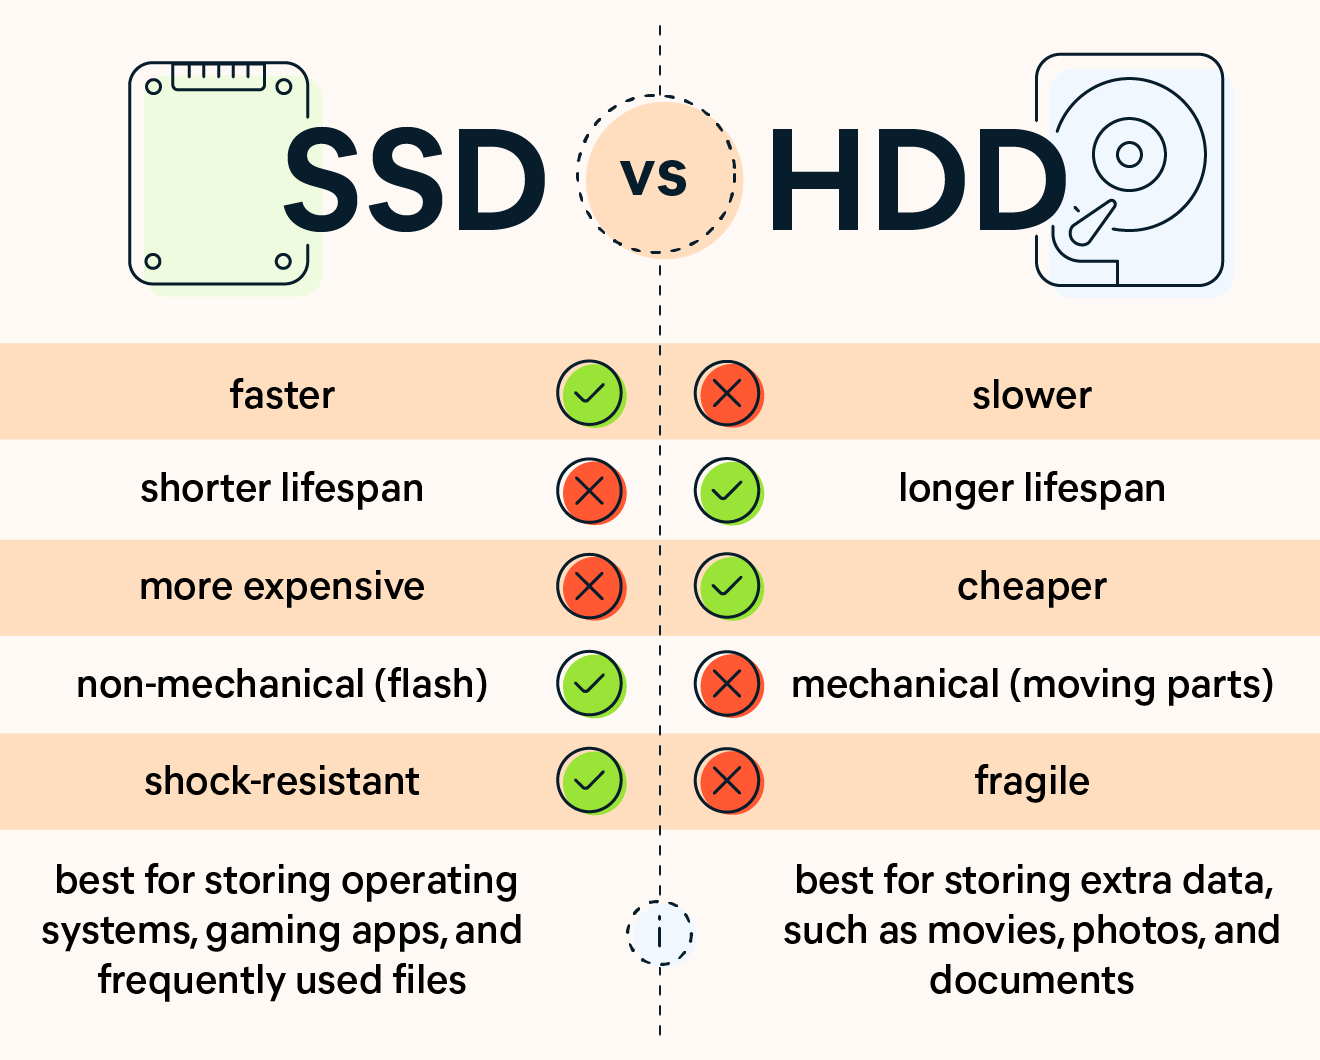 Is it better to have more SSD or HDD?